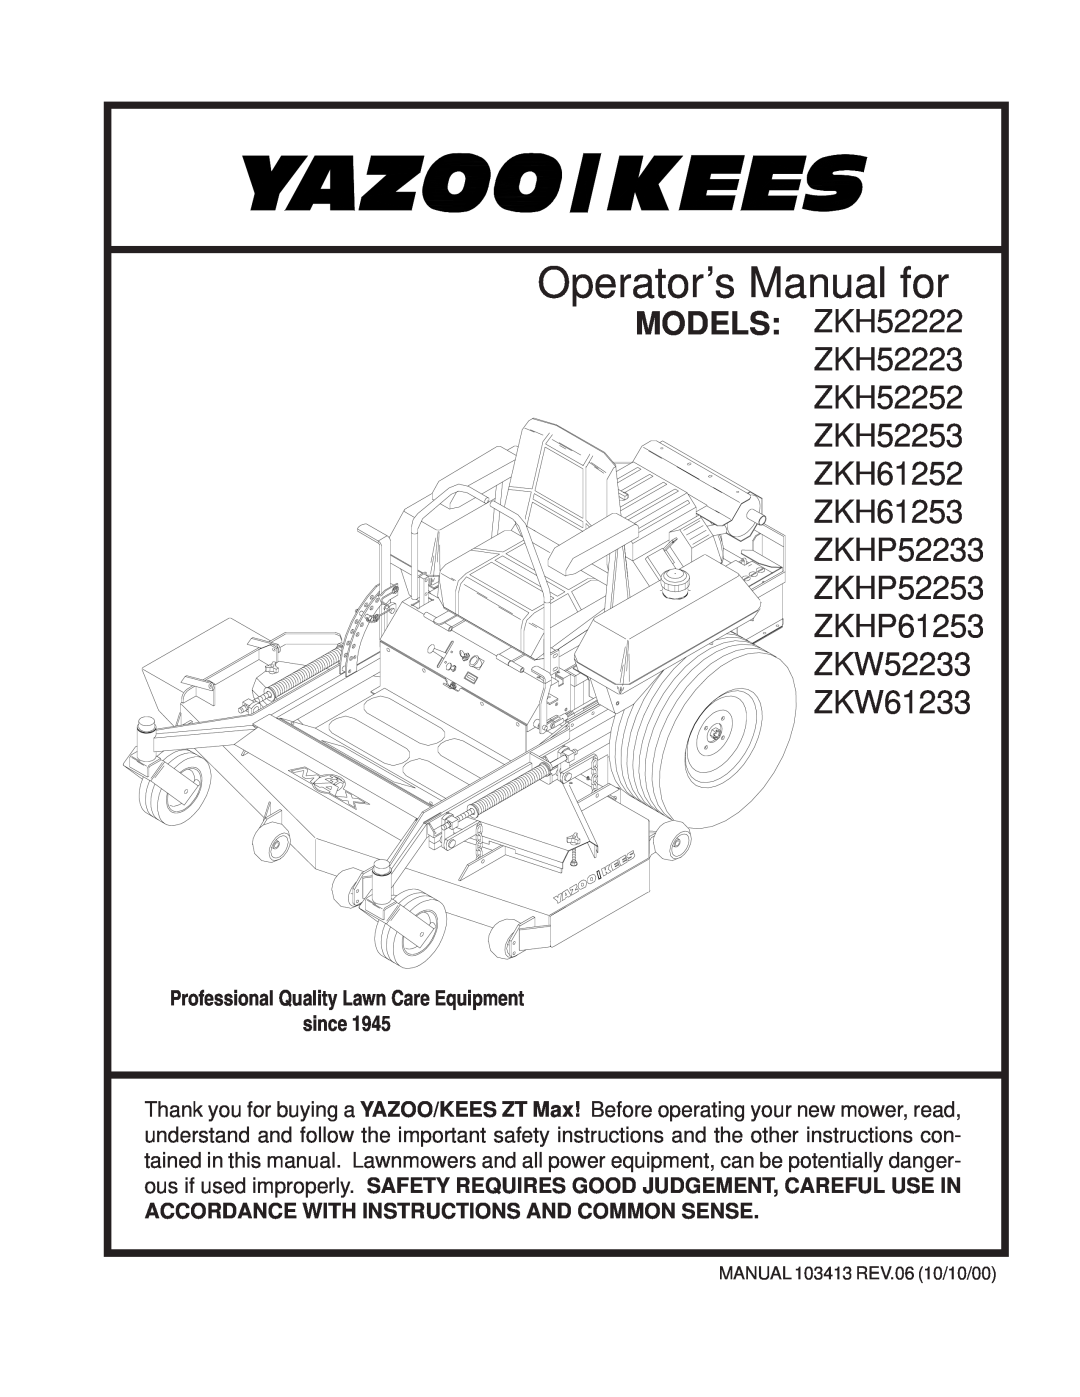 Yazoo/Kees important safety instructions Operator’s Manual for, MODELS ZKH52222, ZKHP61253 ZKW52233 ZKW61233 